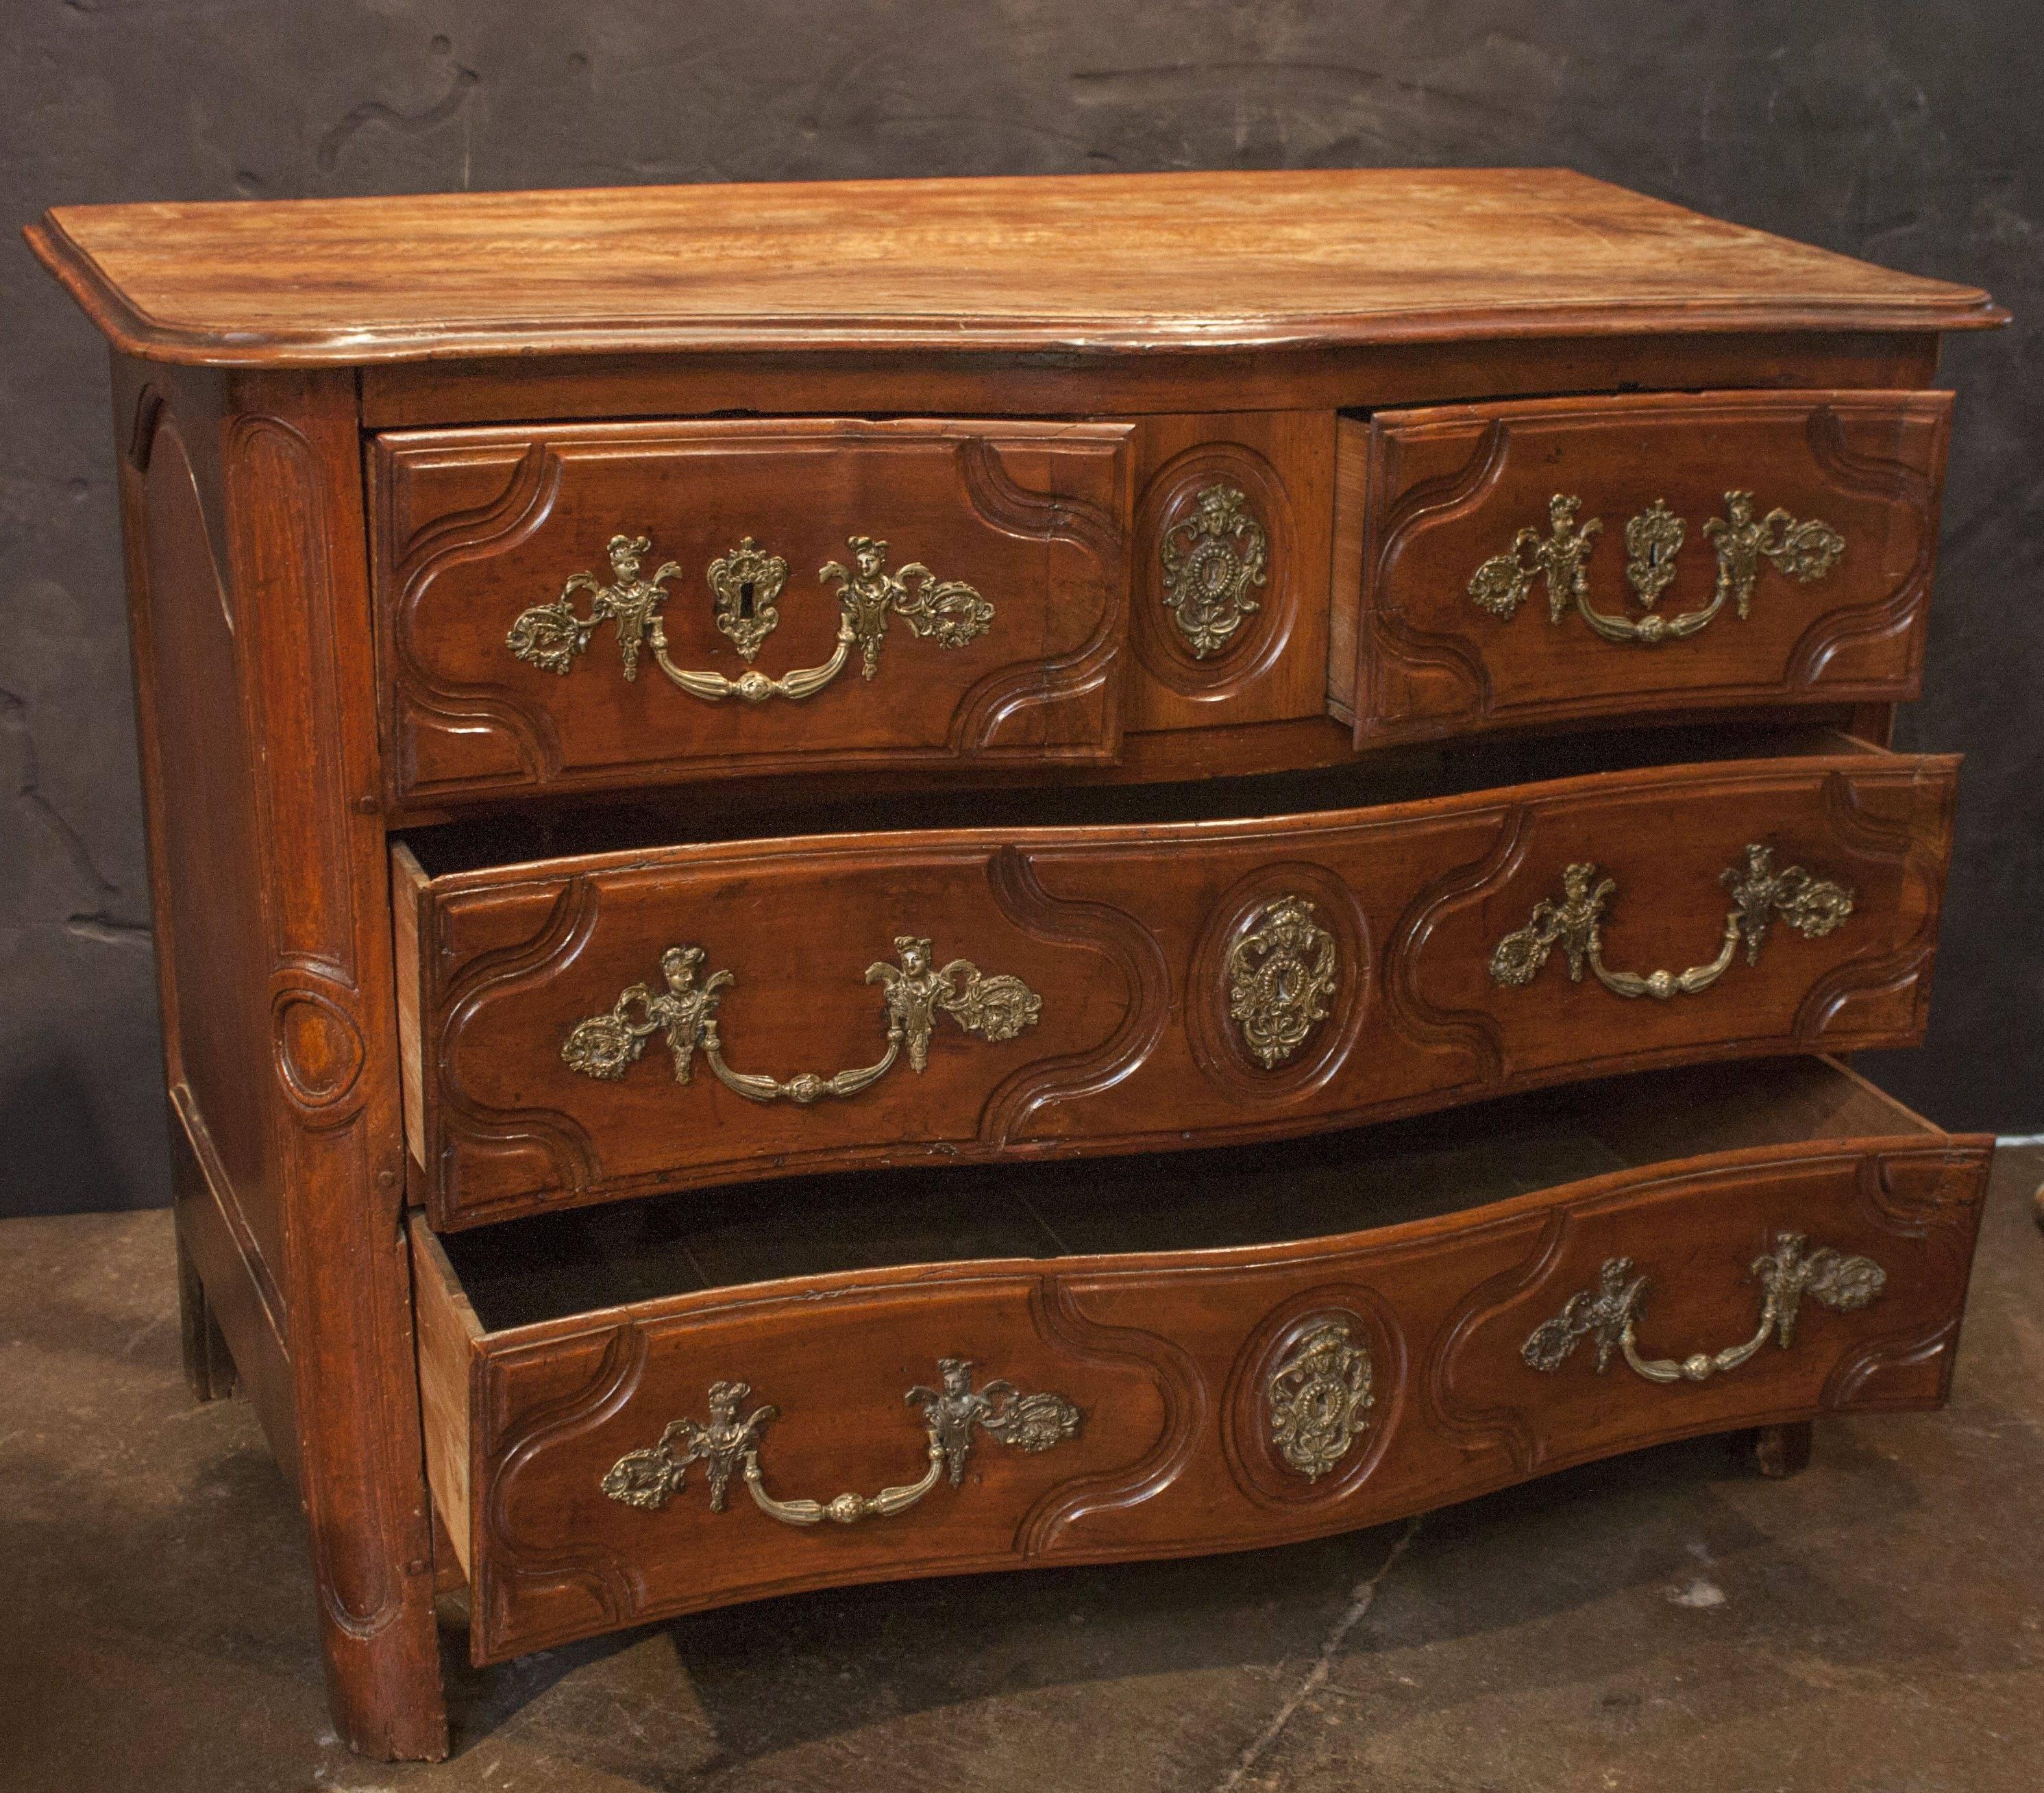 France late 18th century carved walnut commode. The serpentine case fitted with two small and two large drawers.

Measures: H 36.25